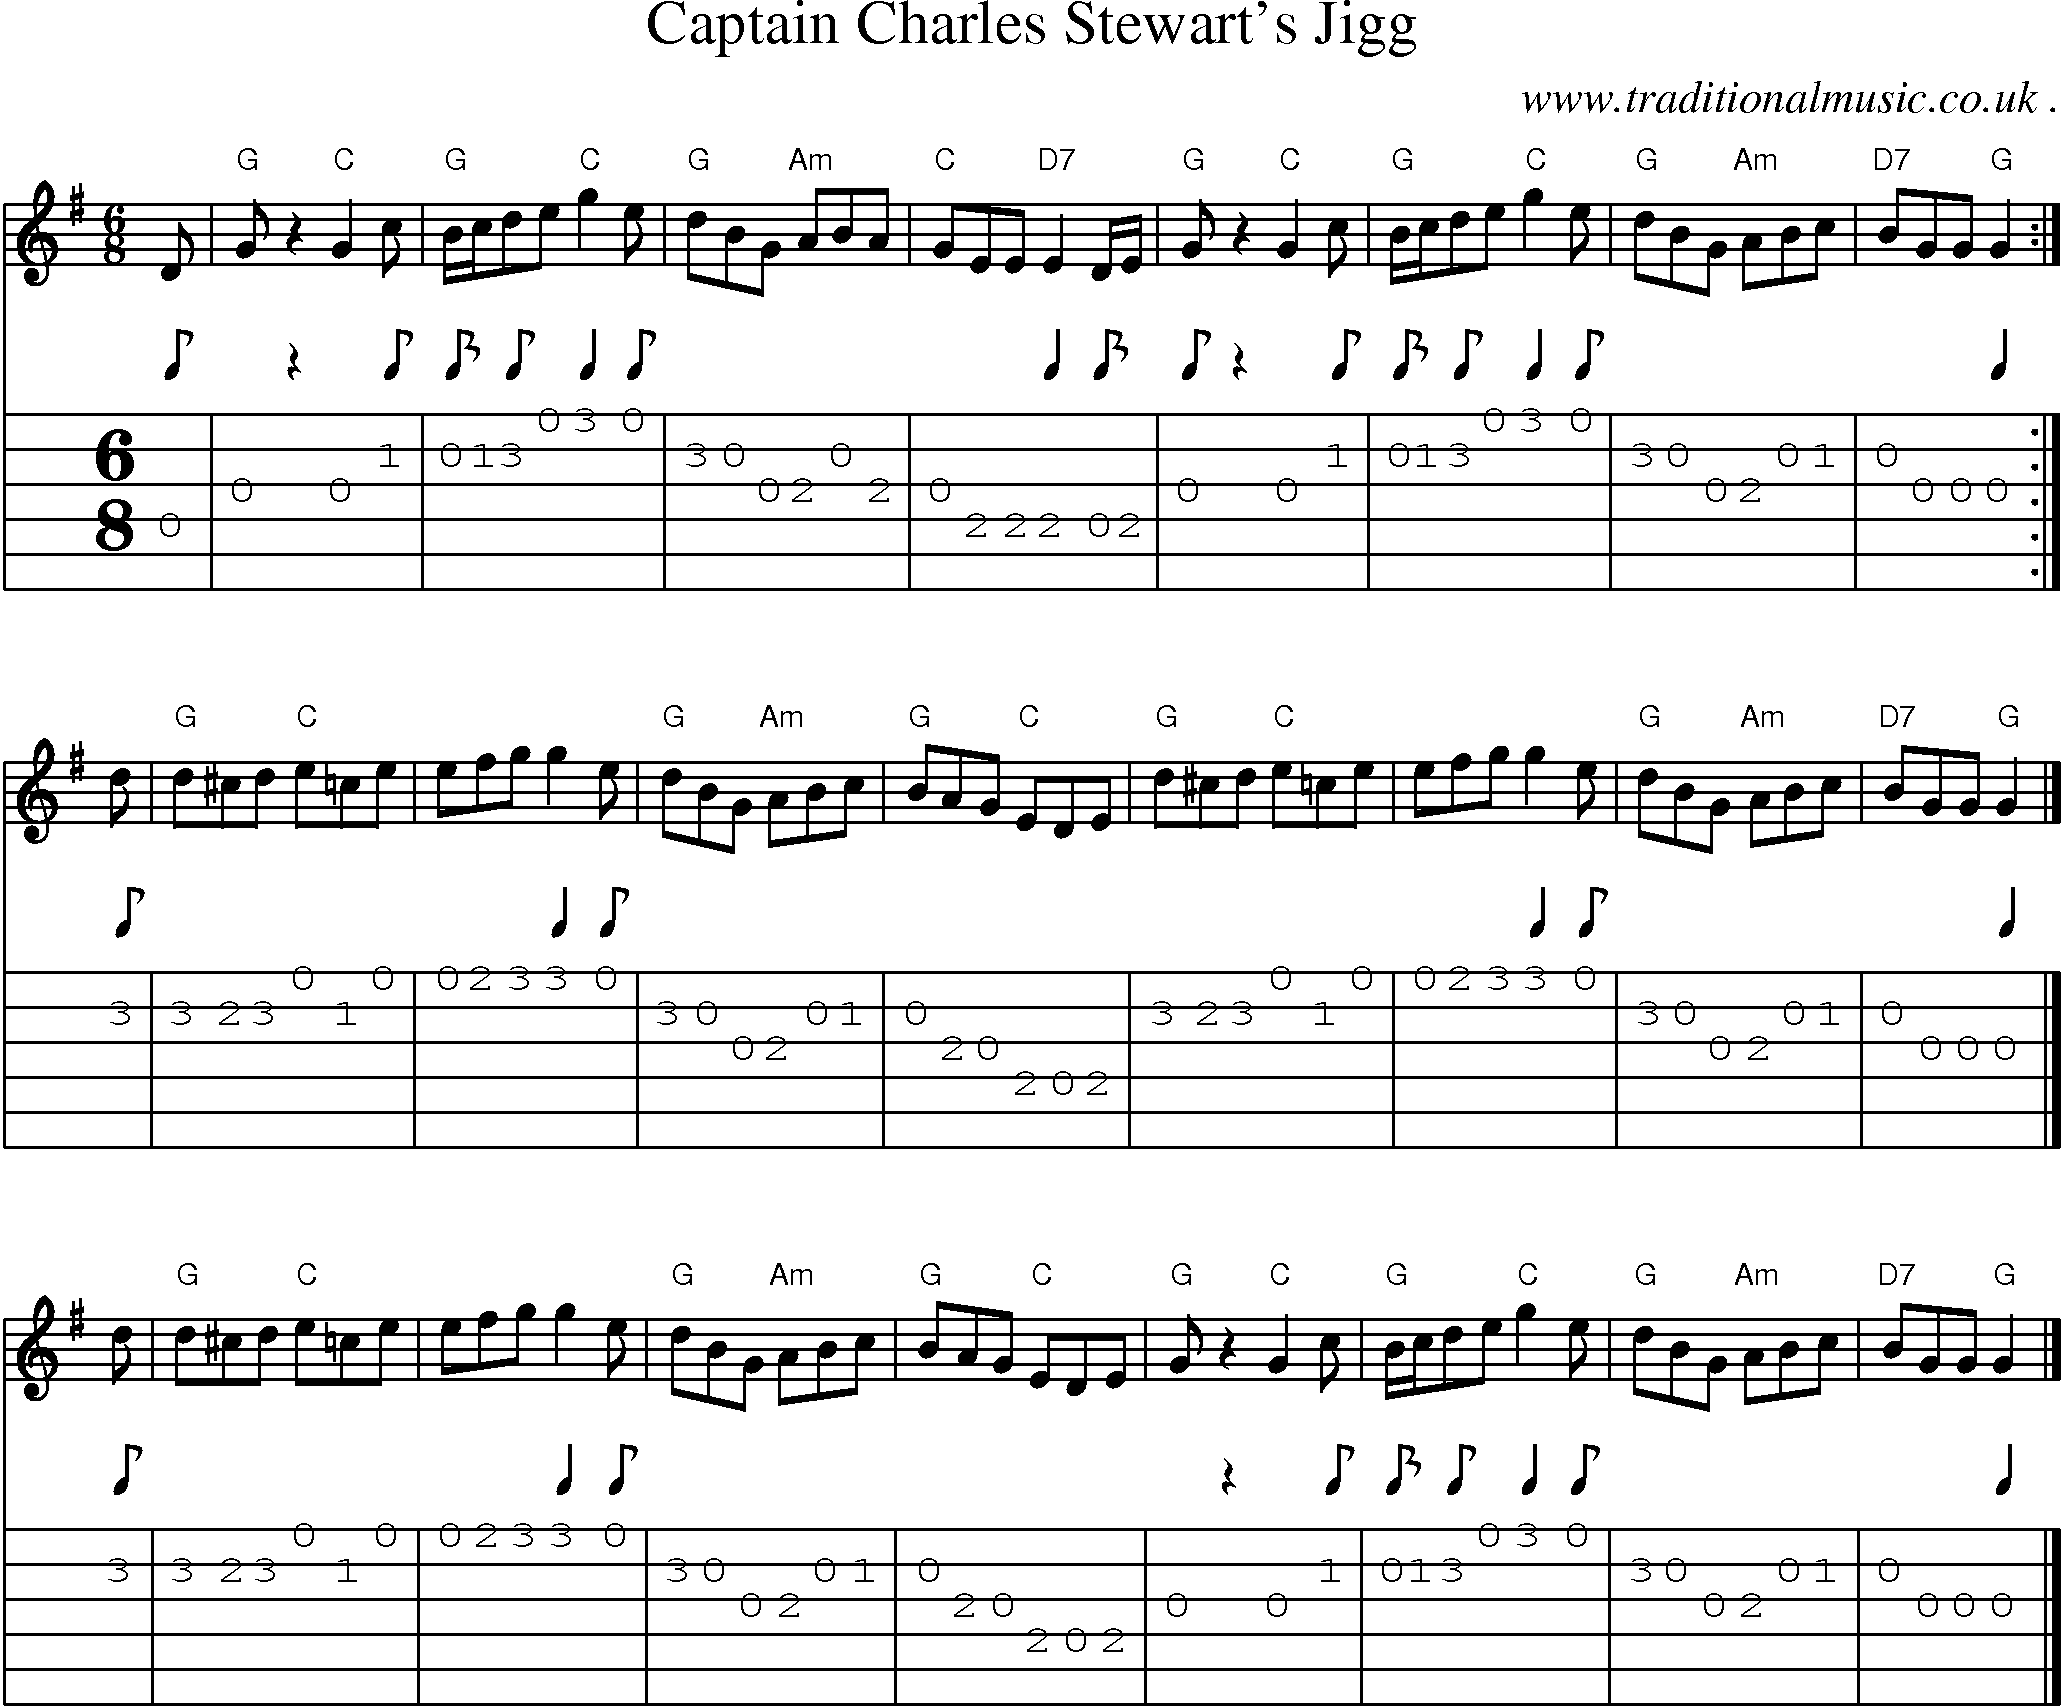 Sheet-music  score, Chords and Guitar Tabs for Captain Charles Stewarts Jigg